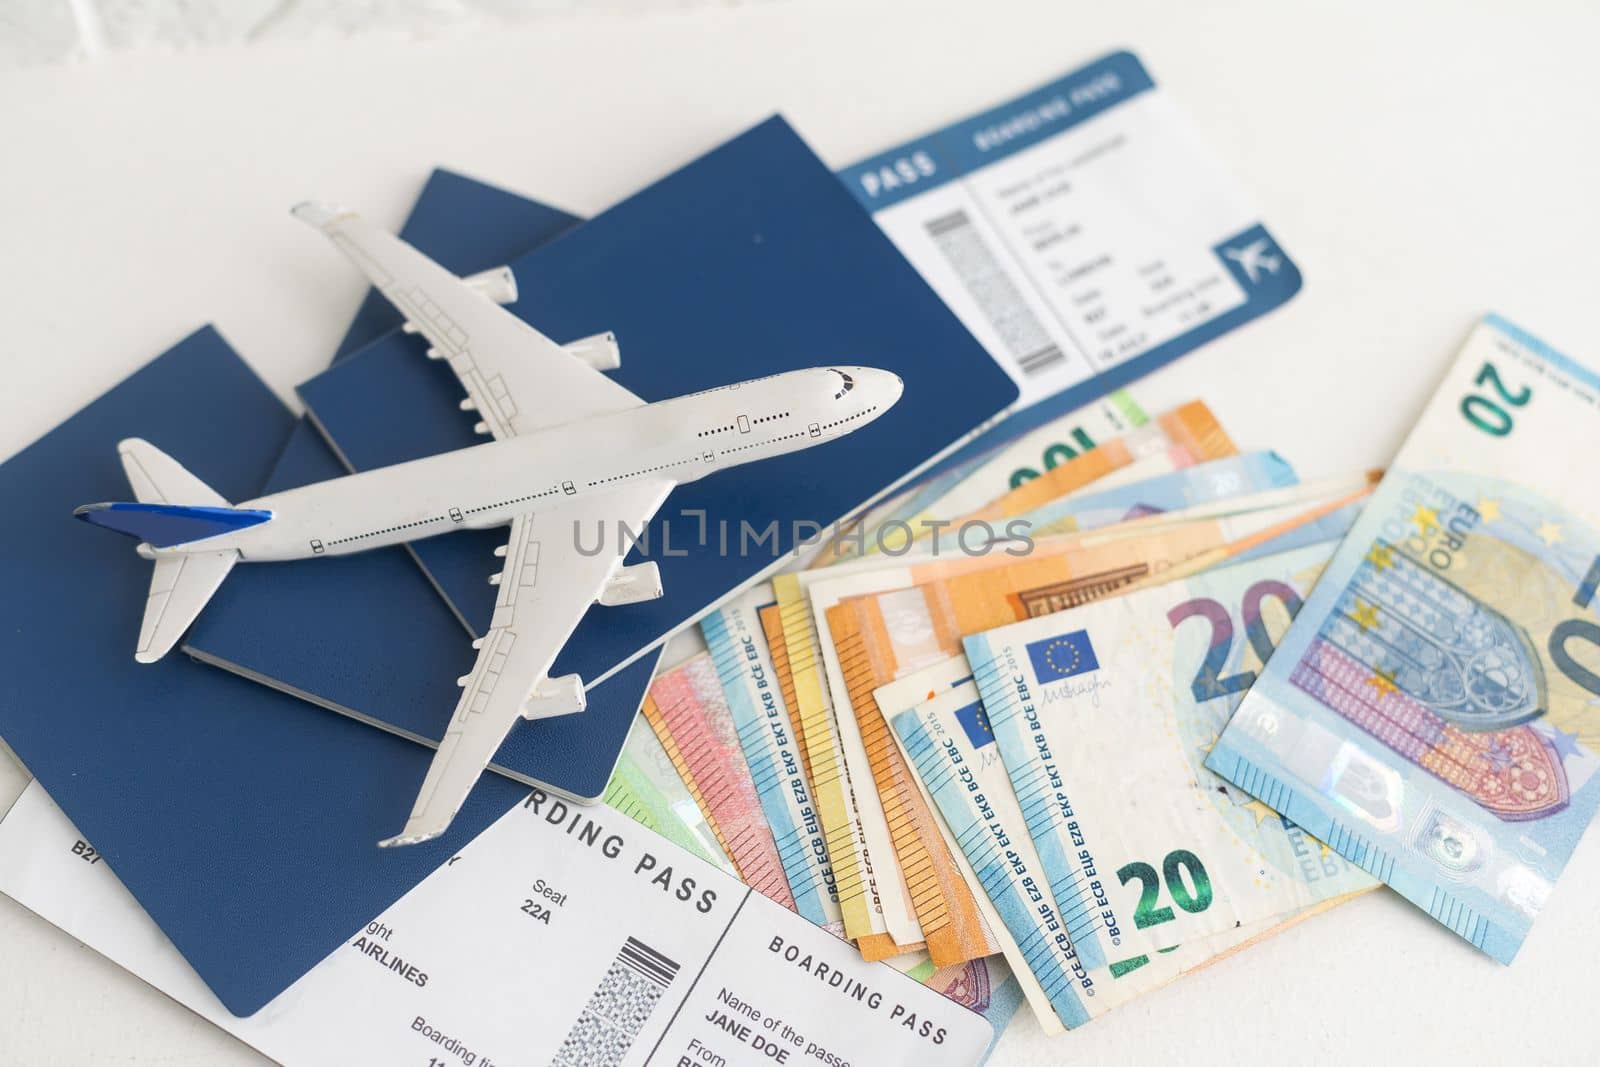 Airline tickets and documents on white background by Andelov13